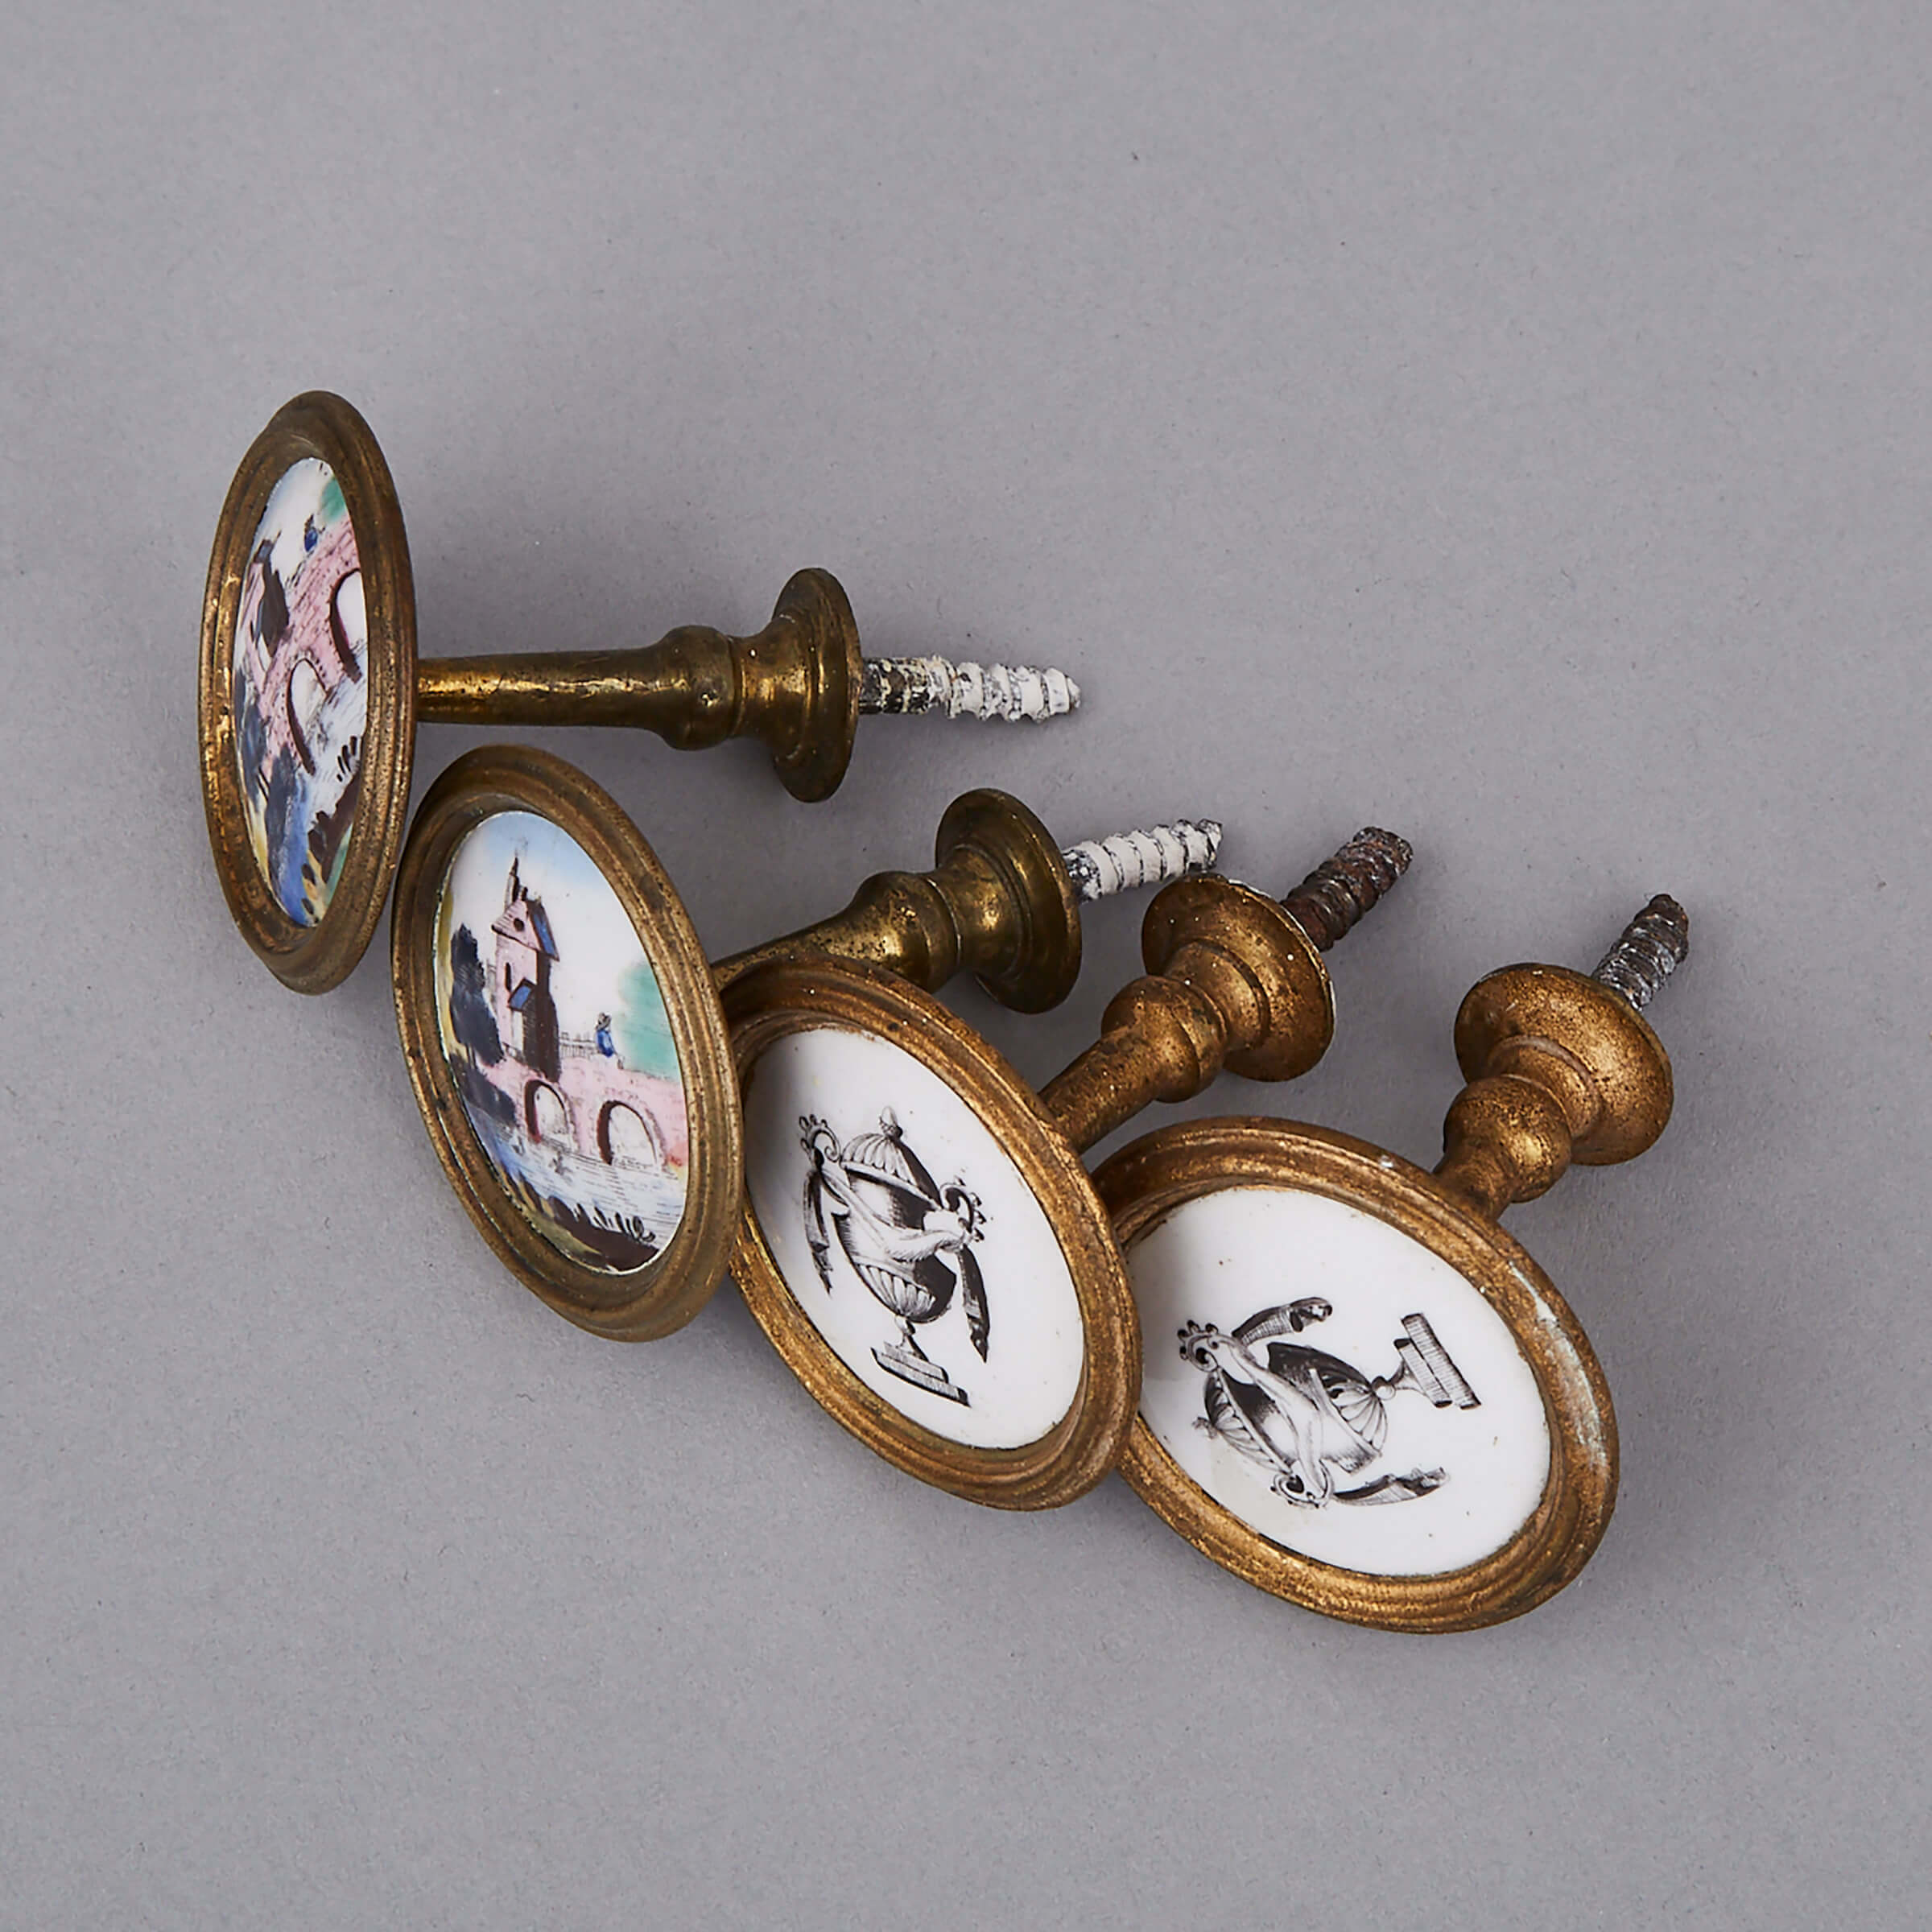 Two Small Pairs of Battersea Enamel Curtain Tiebacks or Picture Hangers, 18th/19th century 